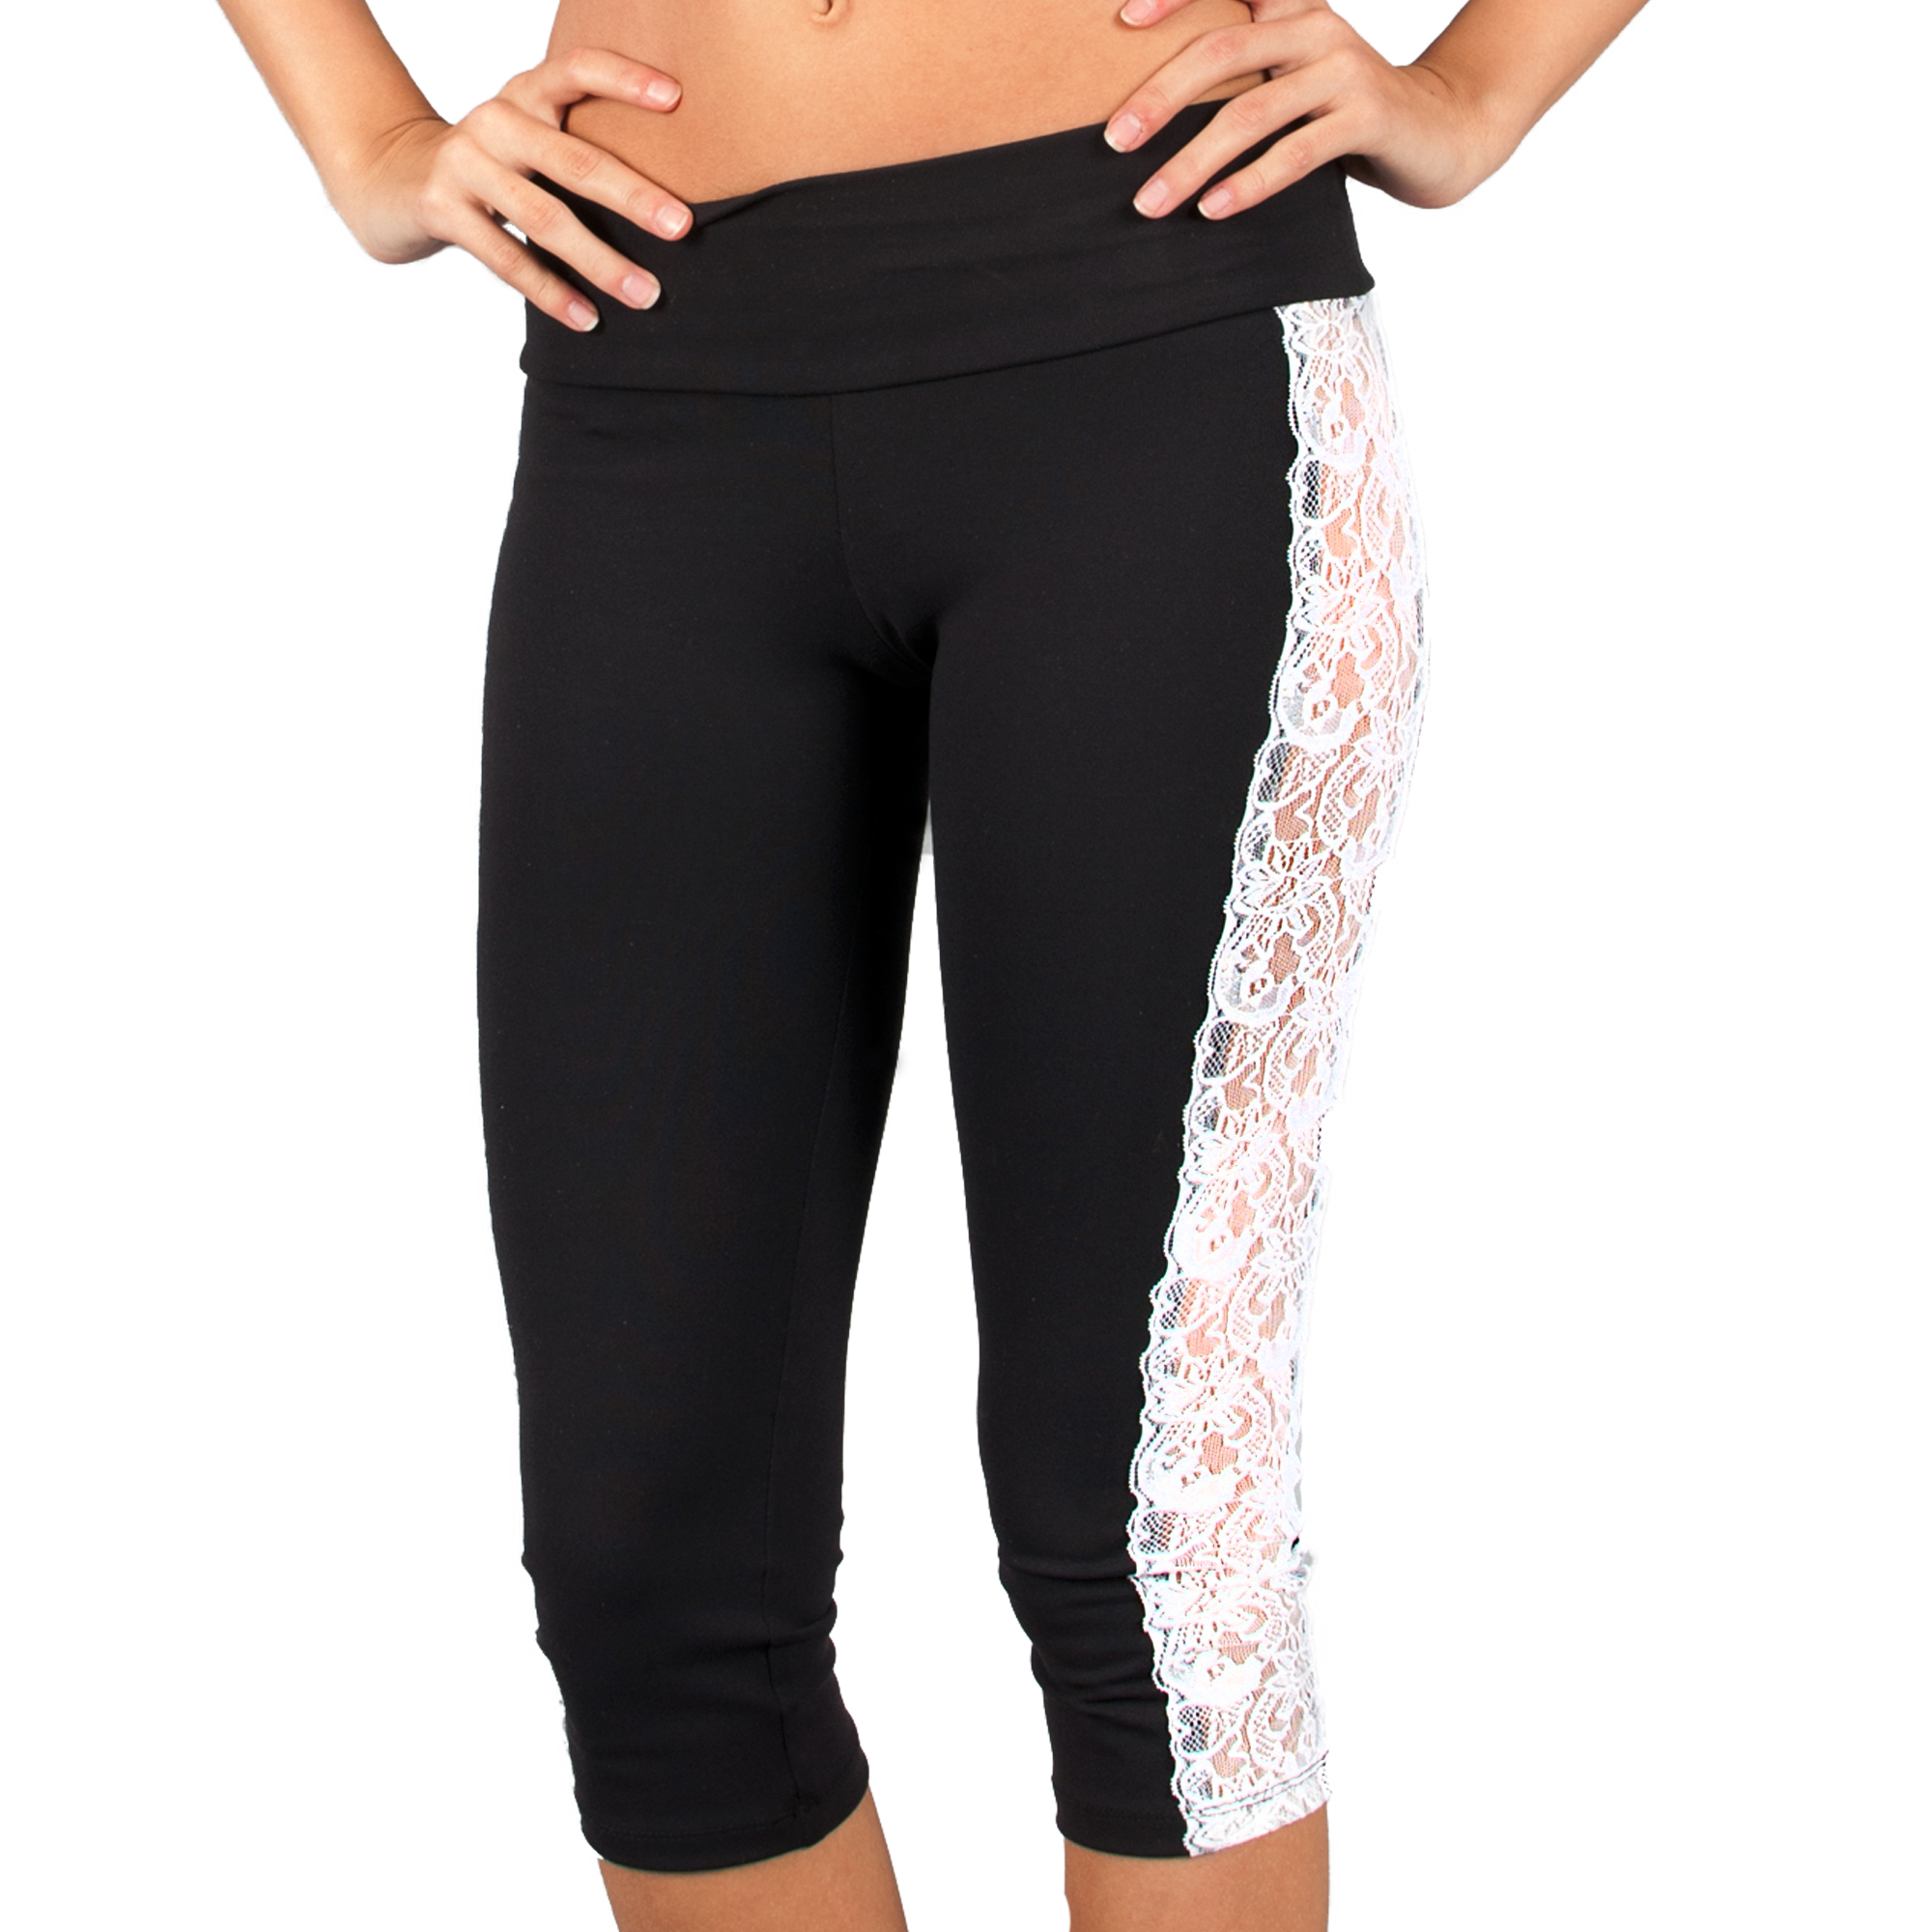 Inspired Activewear, Black & White Lace Capris